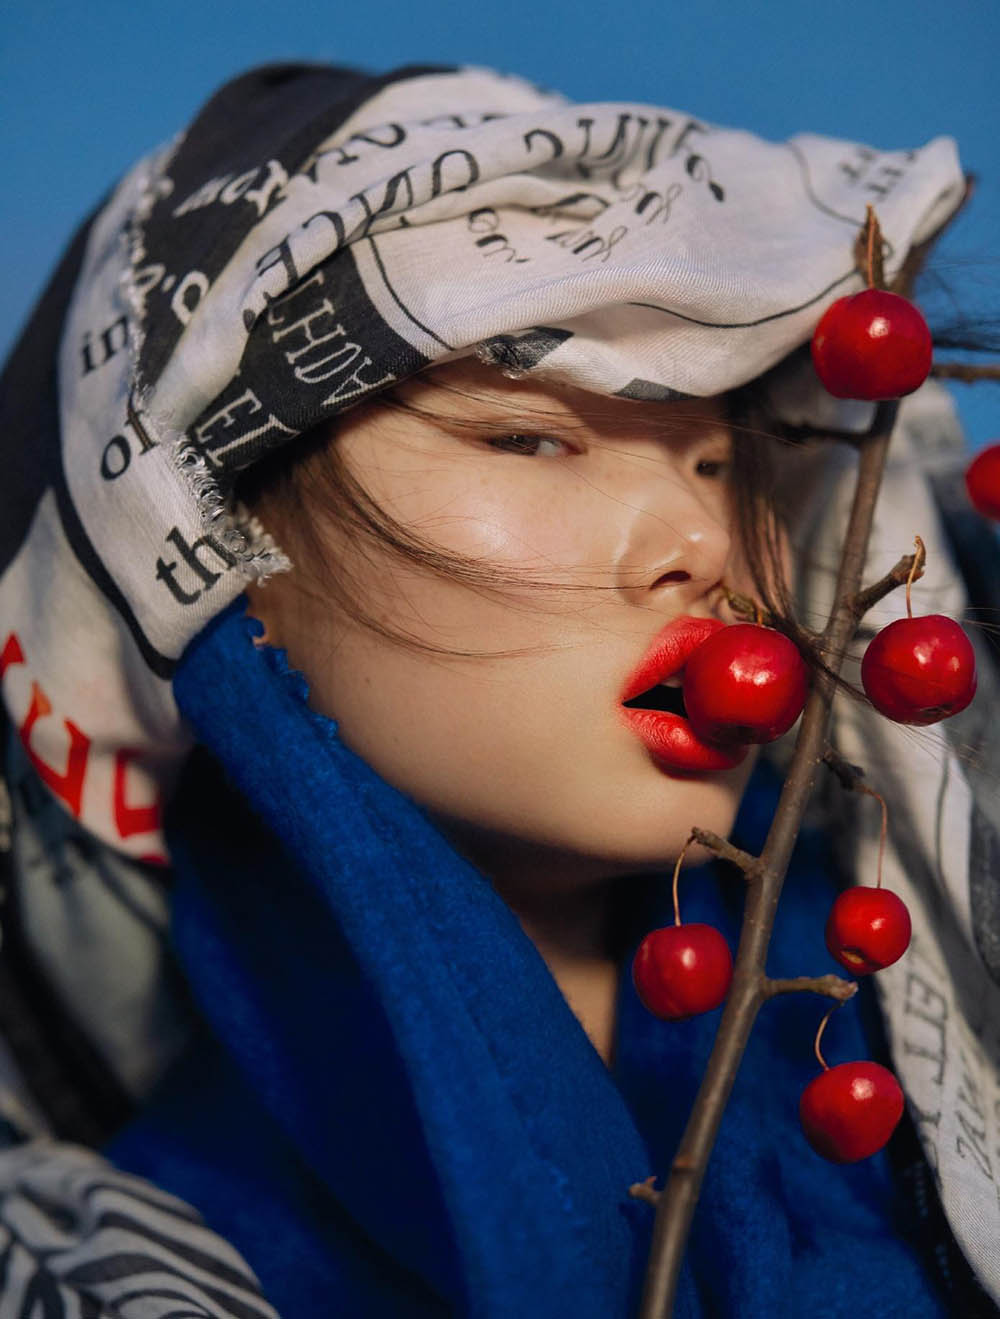 Yoon Young Bae by Txema Yeste for Numéro February 2018